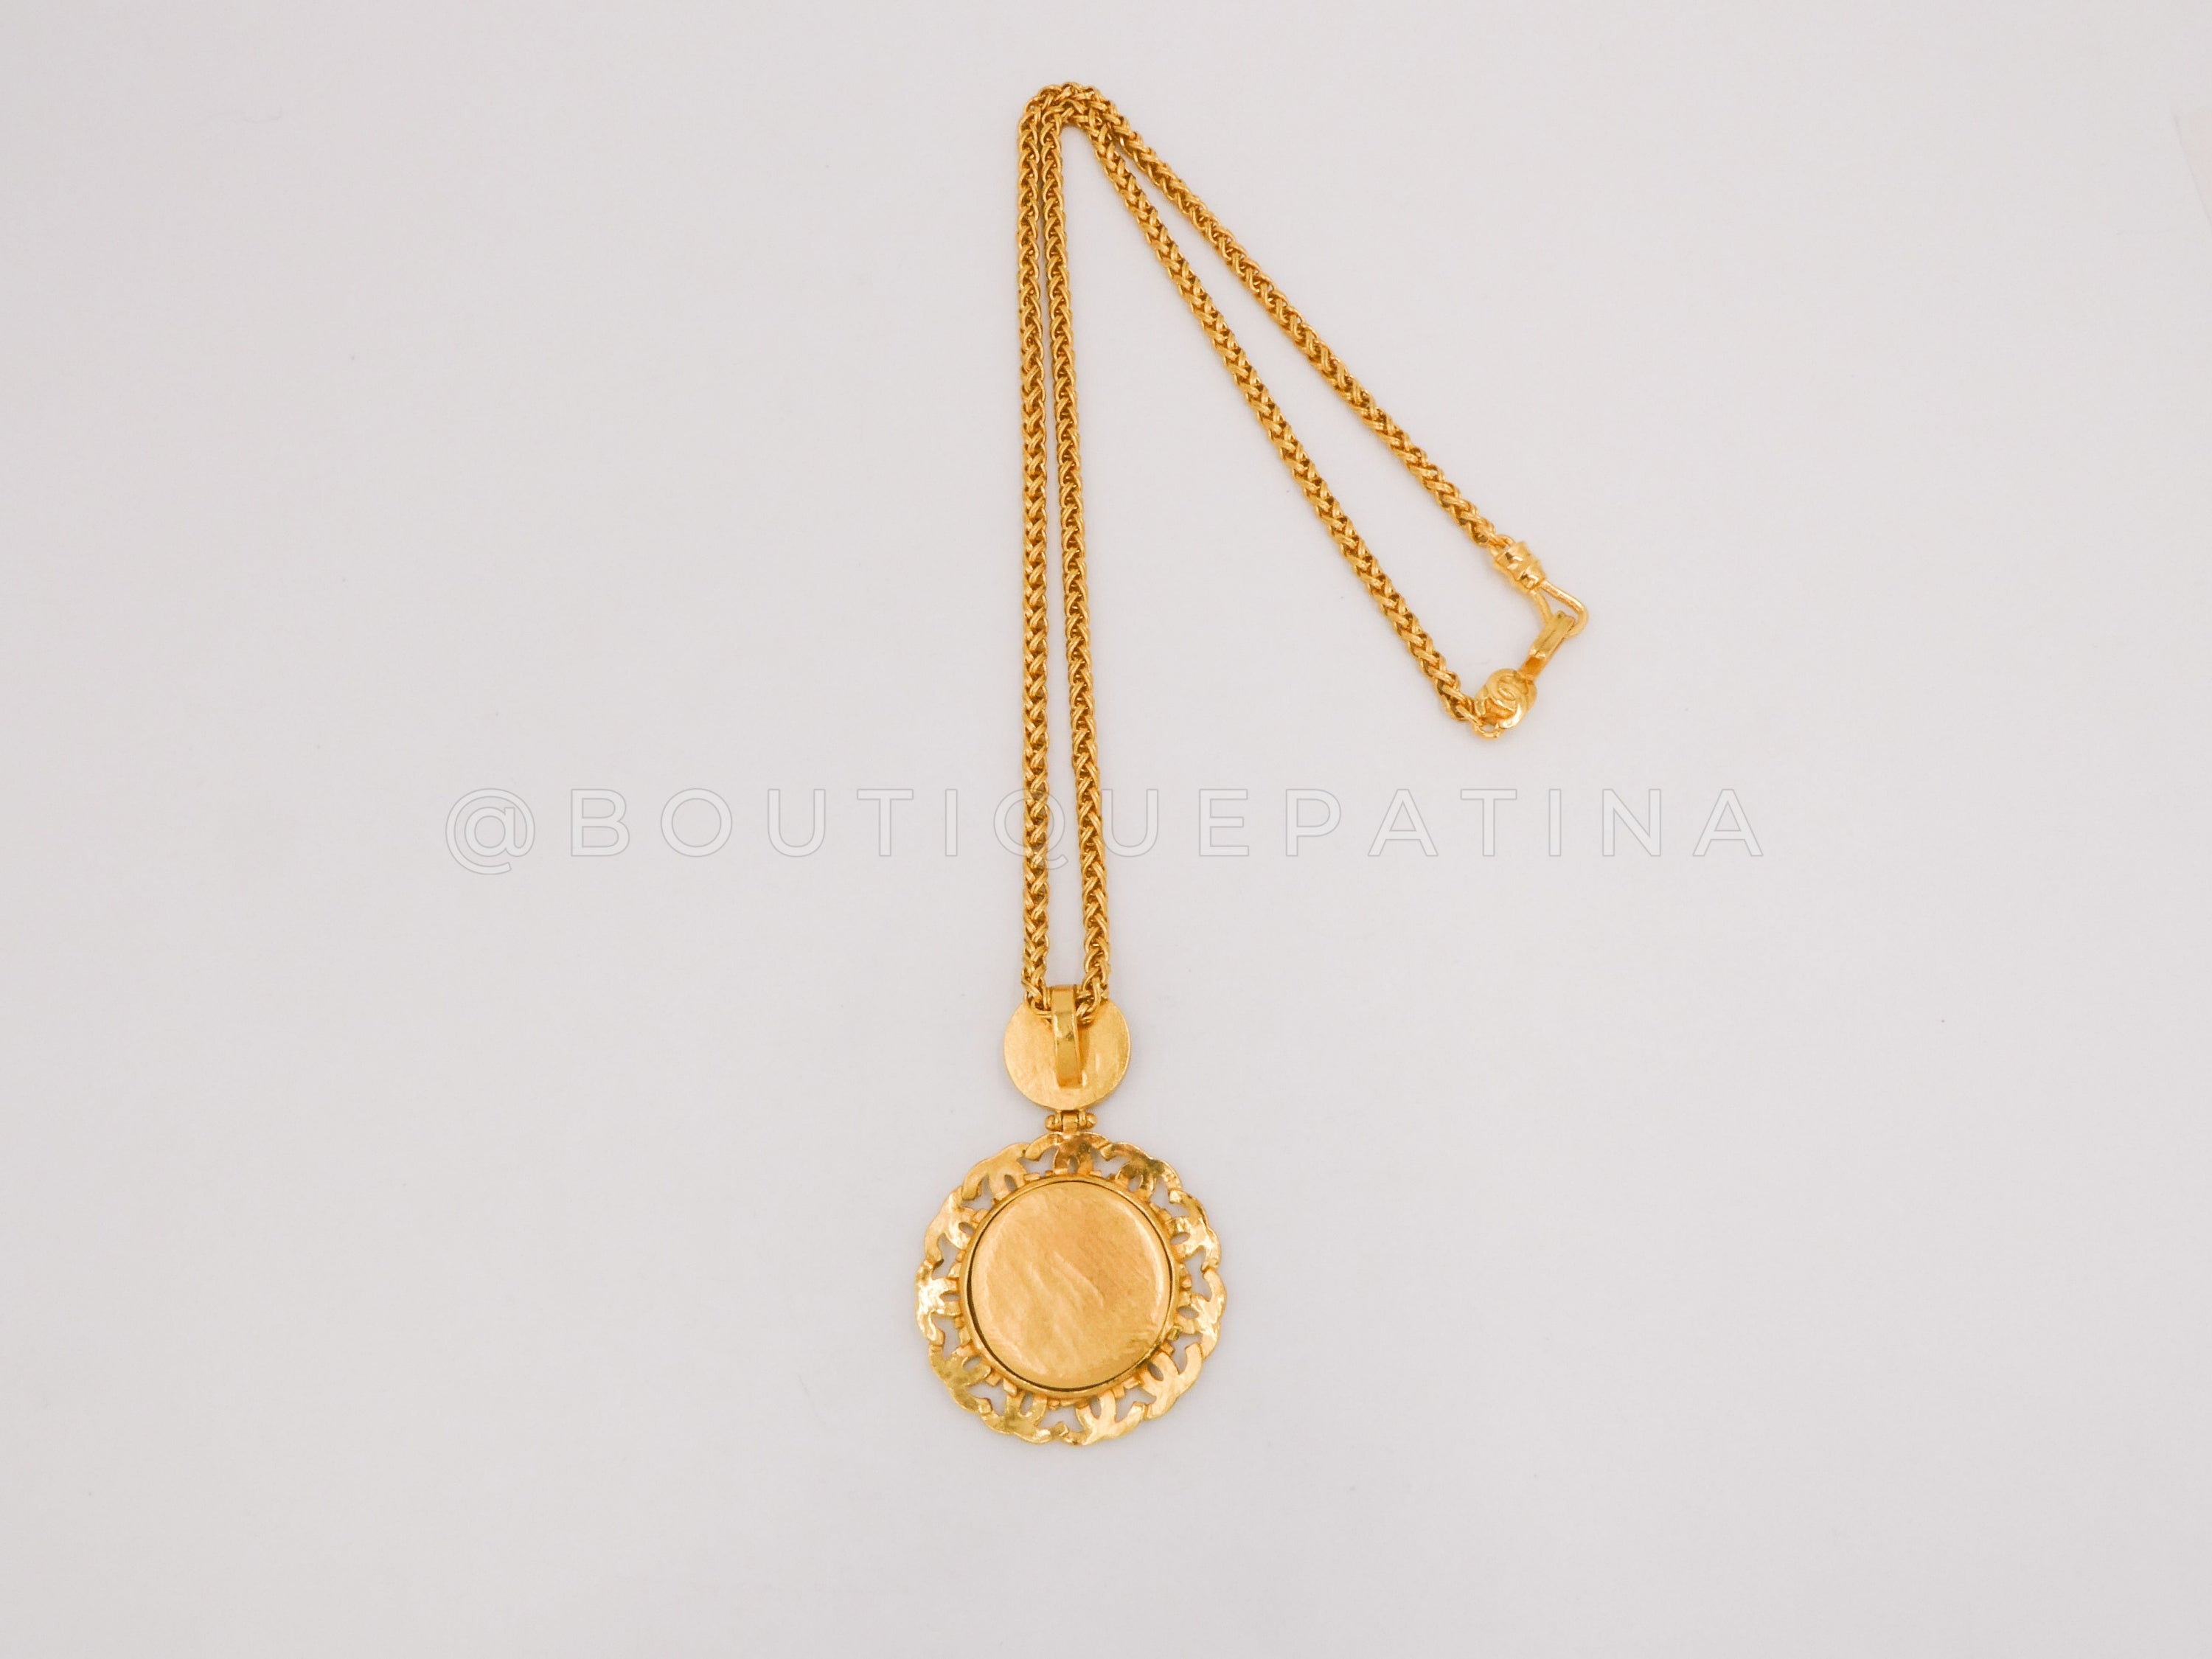 Chanel 95A Vintage Mirror Mother of Pearl Pendant Necklace